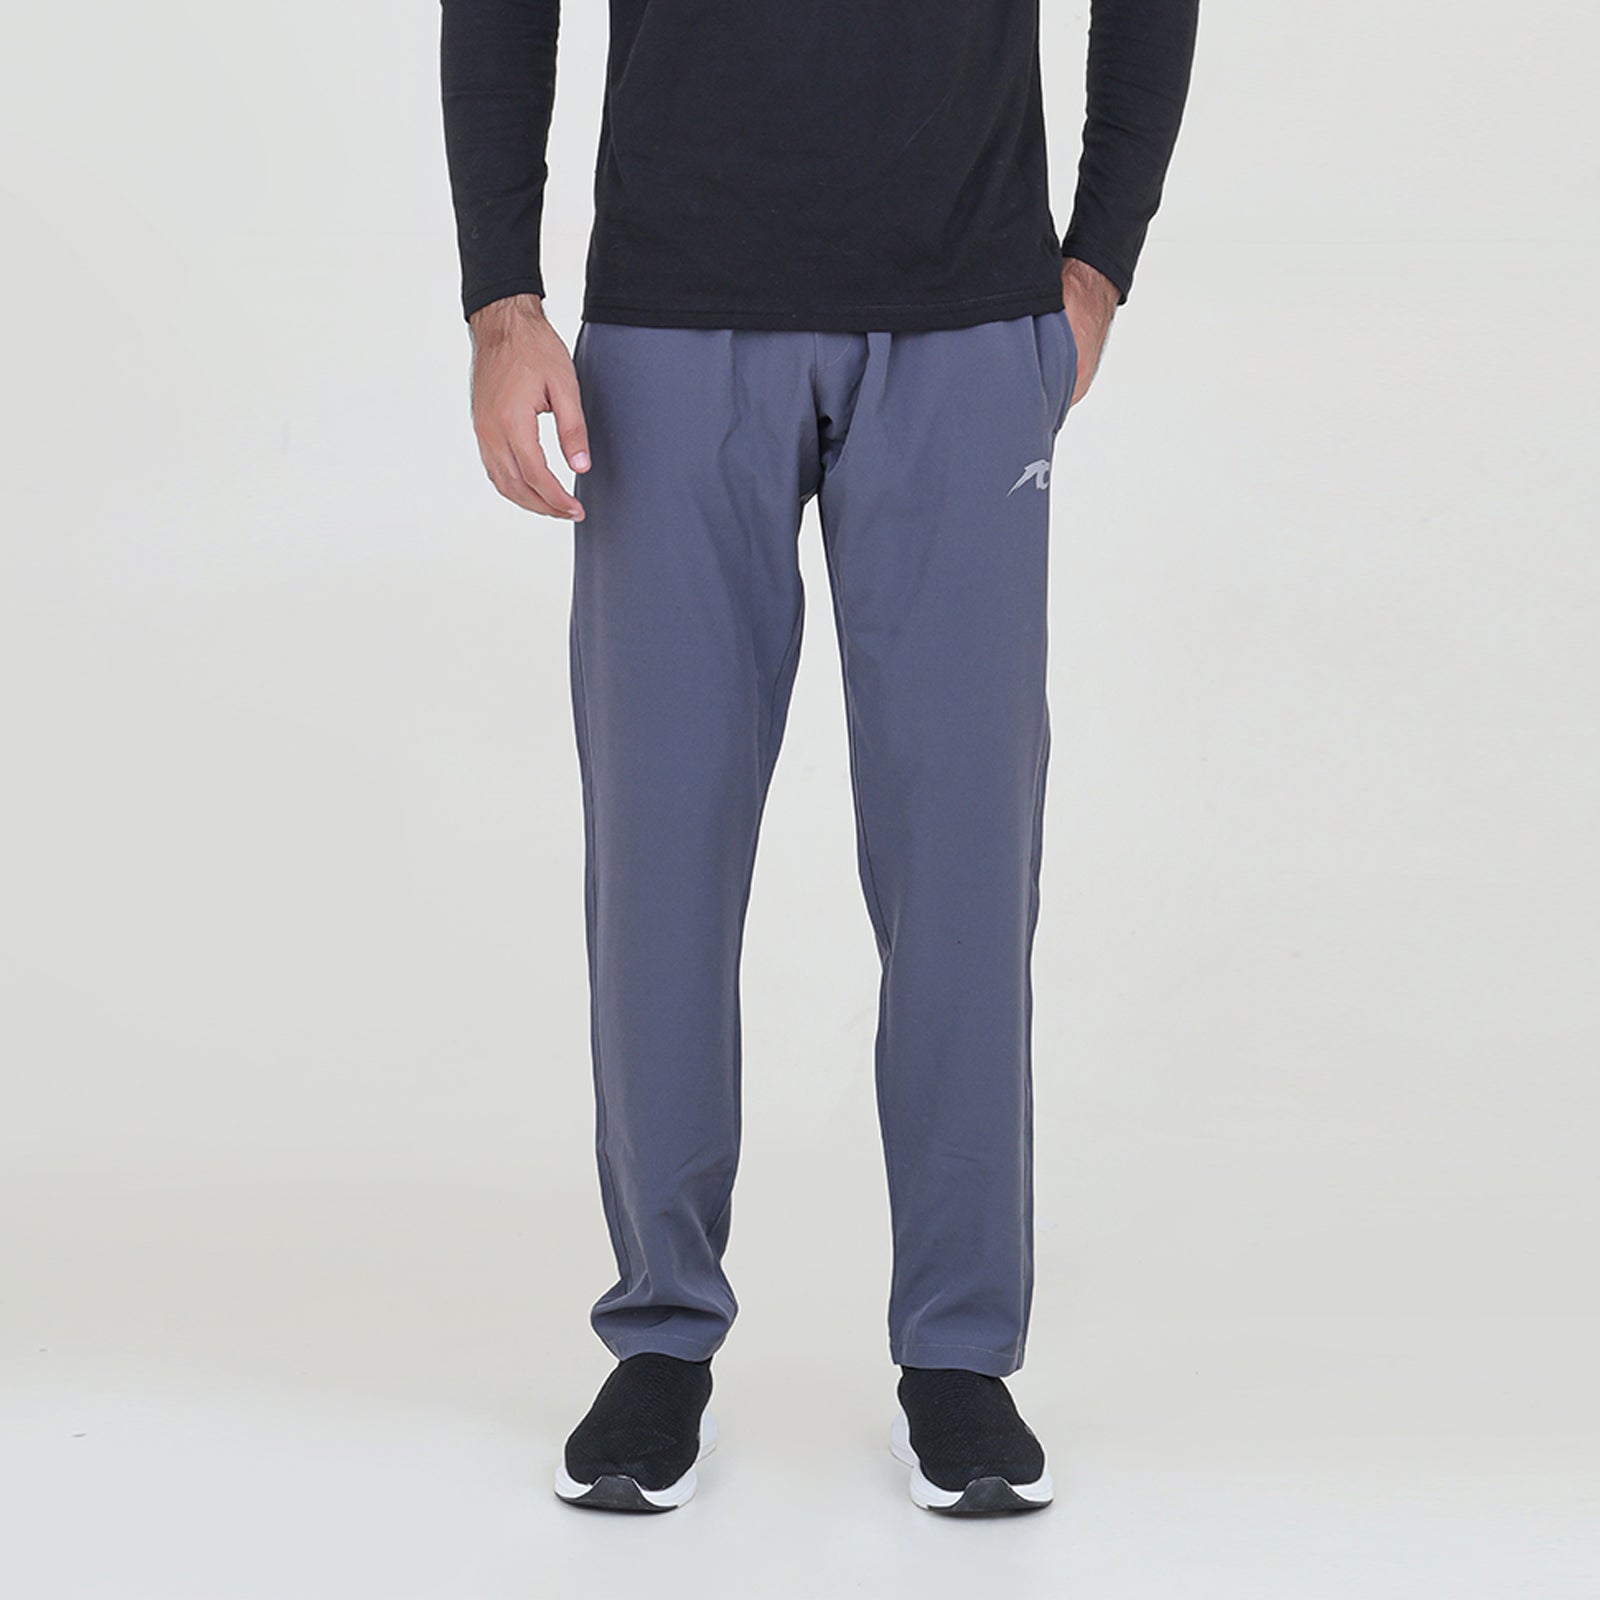 Dry Fast Athleisure Pants-AP-CH-BF1023